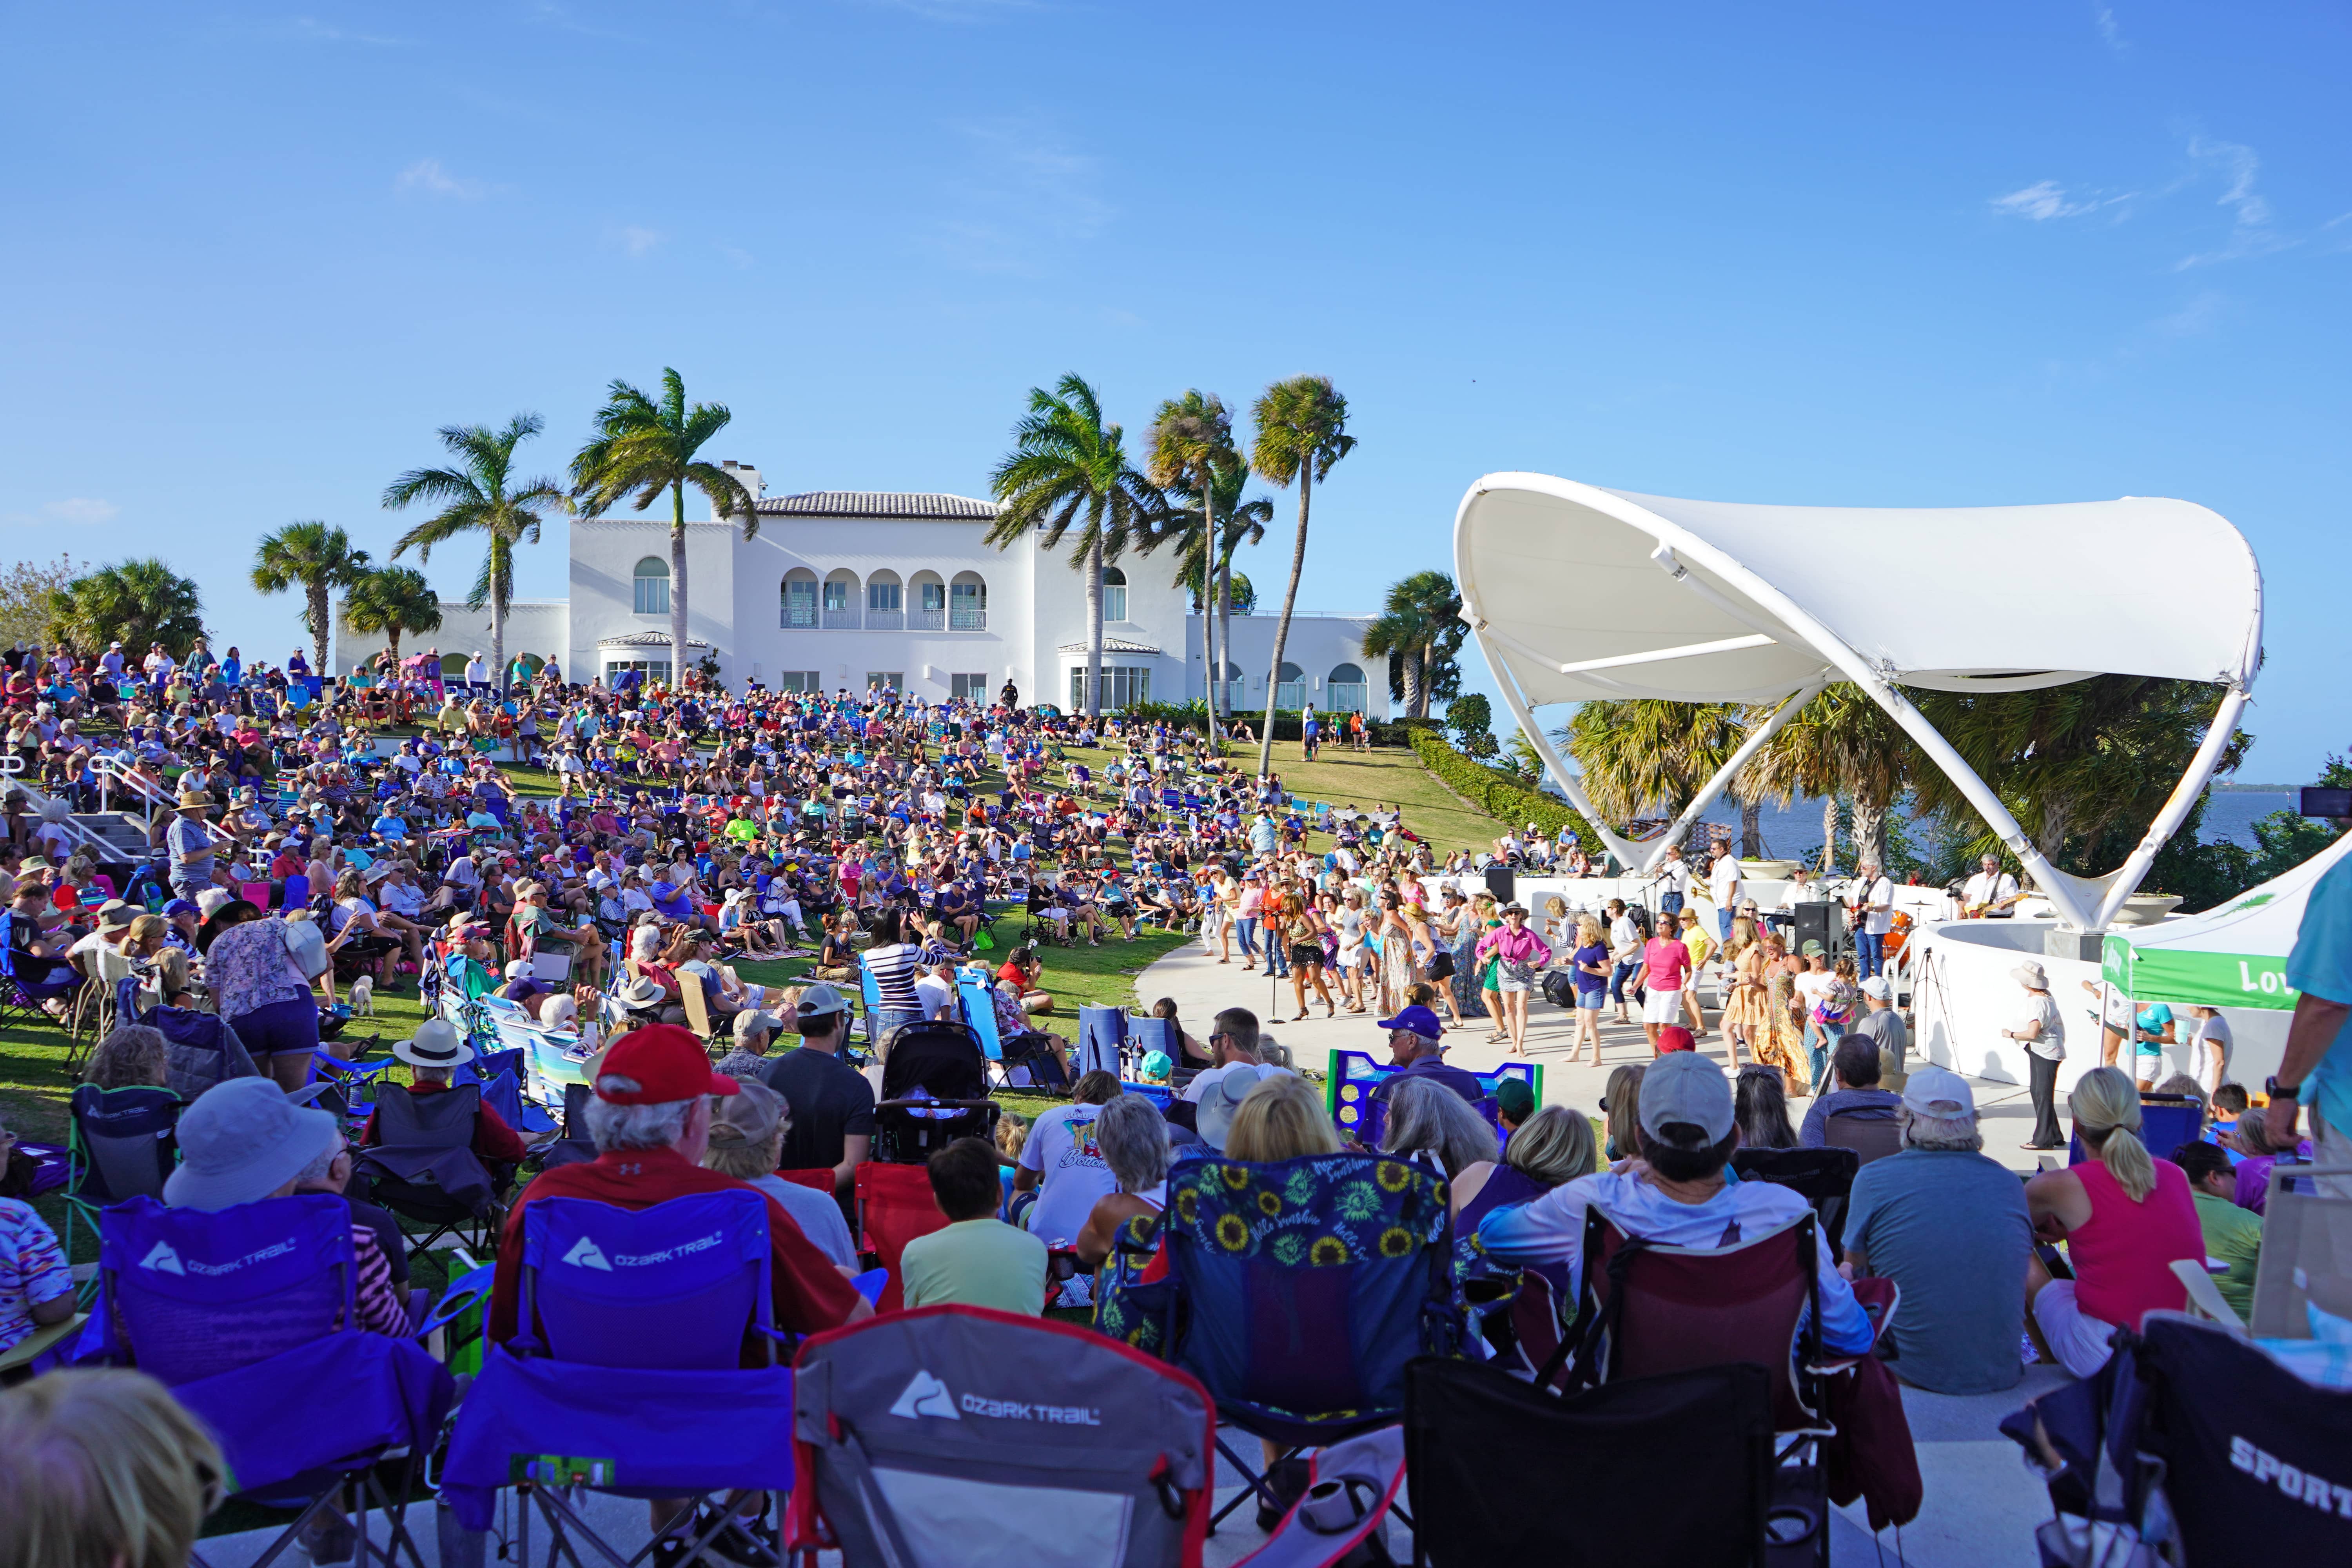 Image of a large crowd surrounding the Mansion at Tuckahoe in Jensen Beach, Florida, as they listen to a band playing at the Music at the Mansion event